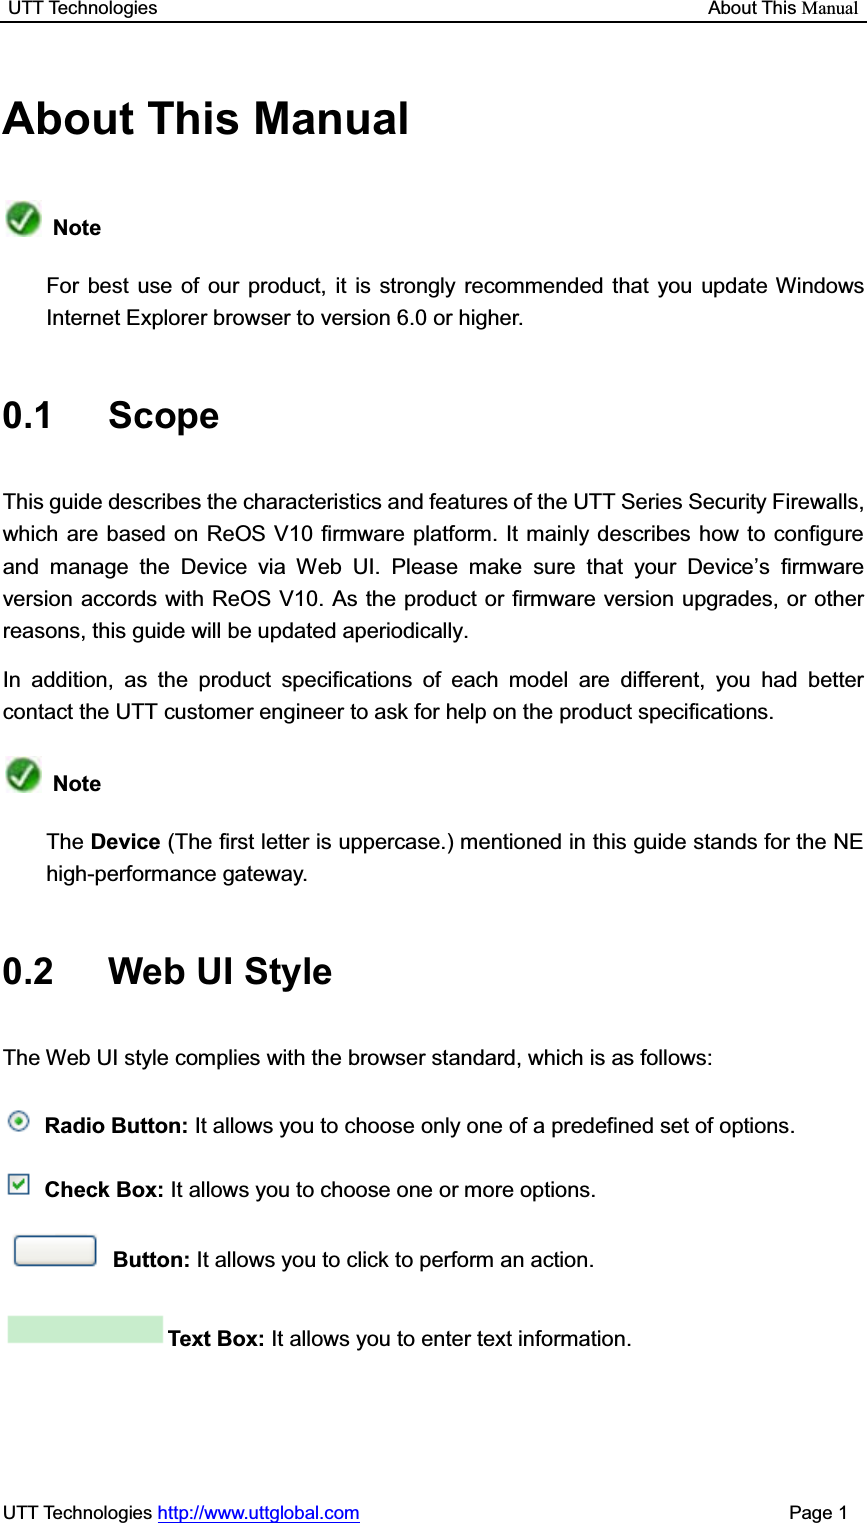 UTT Technologies                                                           About This ManualUTT Technologies http://www.uttglobal.com                                              Page 1 About This Manual NoteFor best use of our product, it is strongly recommended that you update Windows Internet Explorer browser to version 6.0 or higher.   0.1 Scope This guide describes the characteristics and features of the UTT Series Security Firewalls, which are based on ReOS V10 firmware platform. It mainly describes how to configure and manage the Device via Web UI. Please make sure that your Device¶s firmware version accords with ReOS V10. As the product or firmware version upgrades, or other reasons, this guide will be updated aperiodically. In addition, as the product specifications of each model are different, you had better contact the UTT customer engineer to ask for help on the product specifications. NoteThe Device (The first letter is uppercase.) mentioned in this guide stands for the NE high-performance gateway. 0.2 Web UI Style The Web UI style complies with the browser standard, which is as follows: Radio Button: It allows you to choose only one of a predefined set of options. Check Box: It allows you to choose one or more options. Button: It allows you to click to perform an action. Text Box: It allows you to enter text information. 